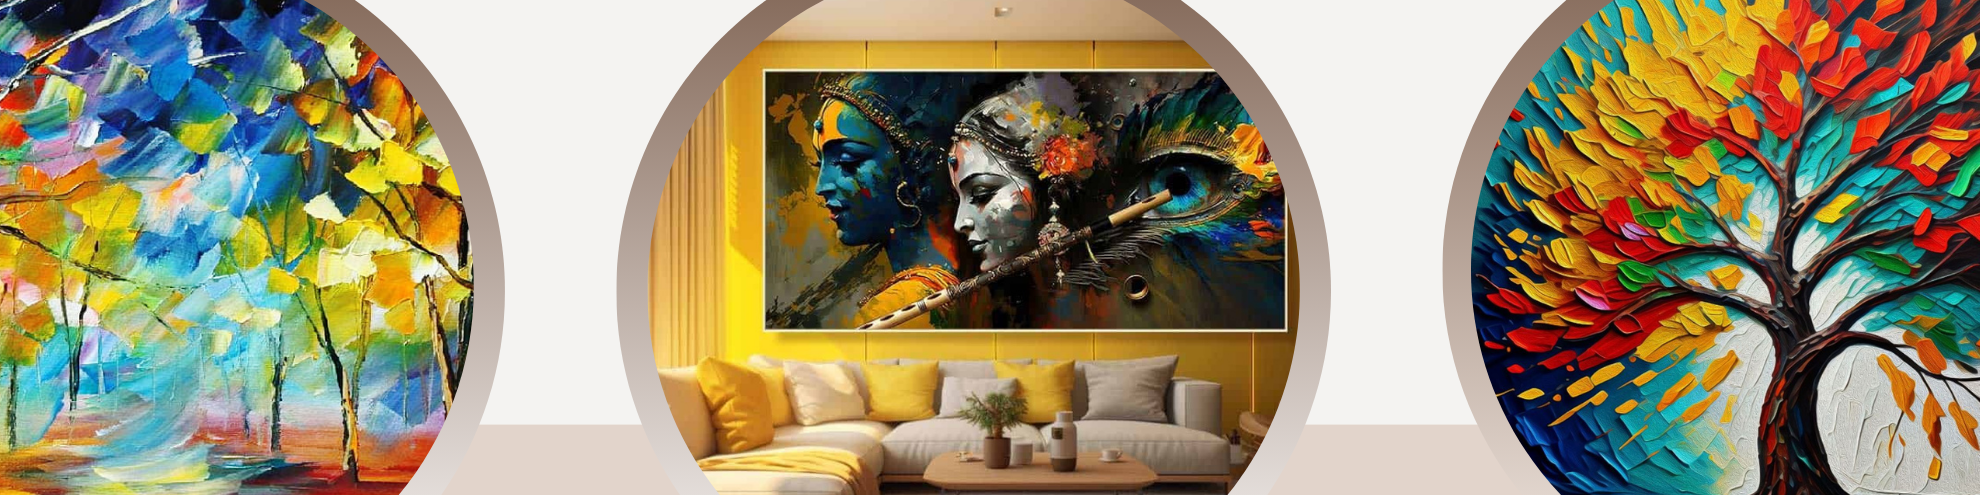 HY decoration Modern Oil Painting